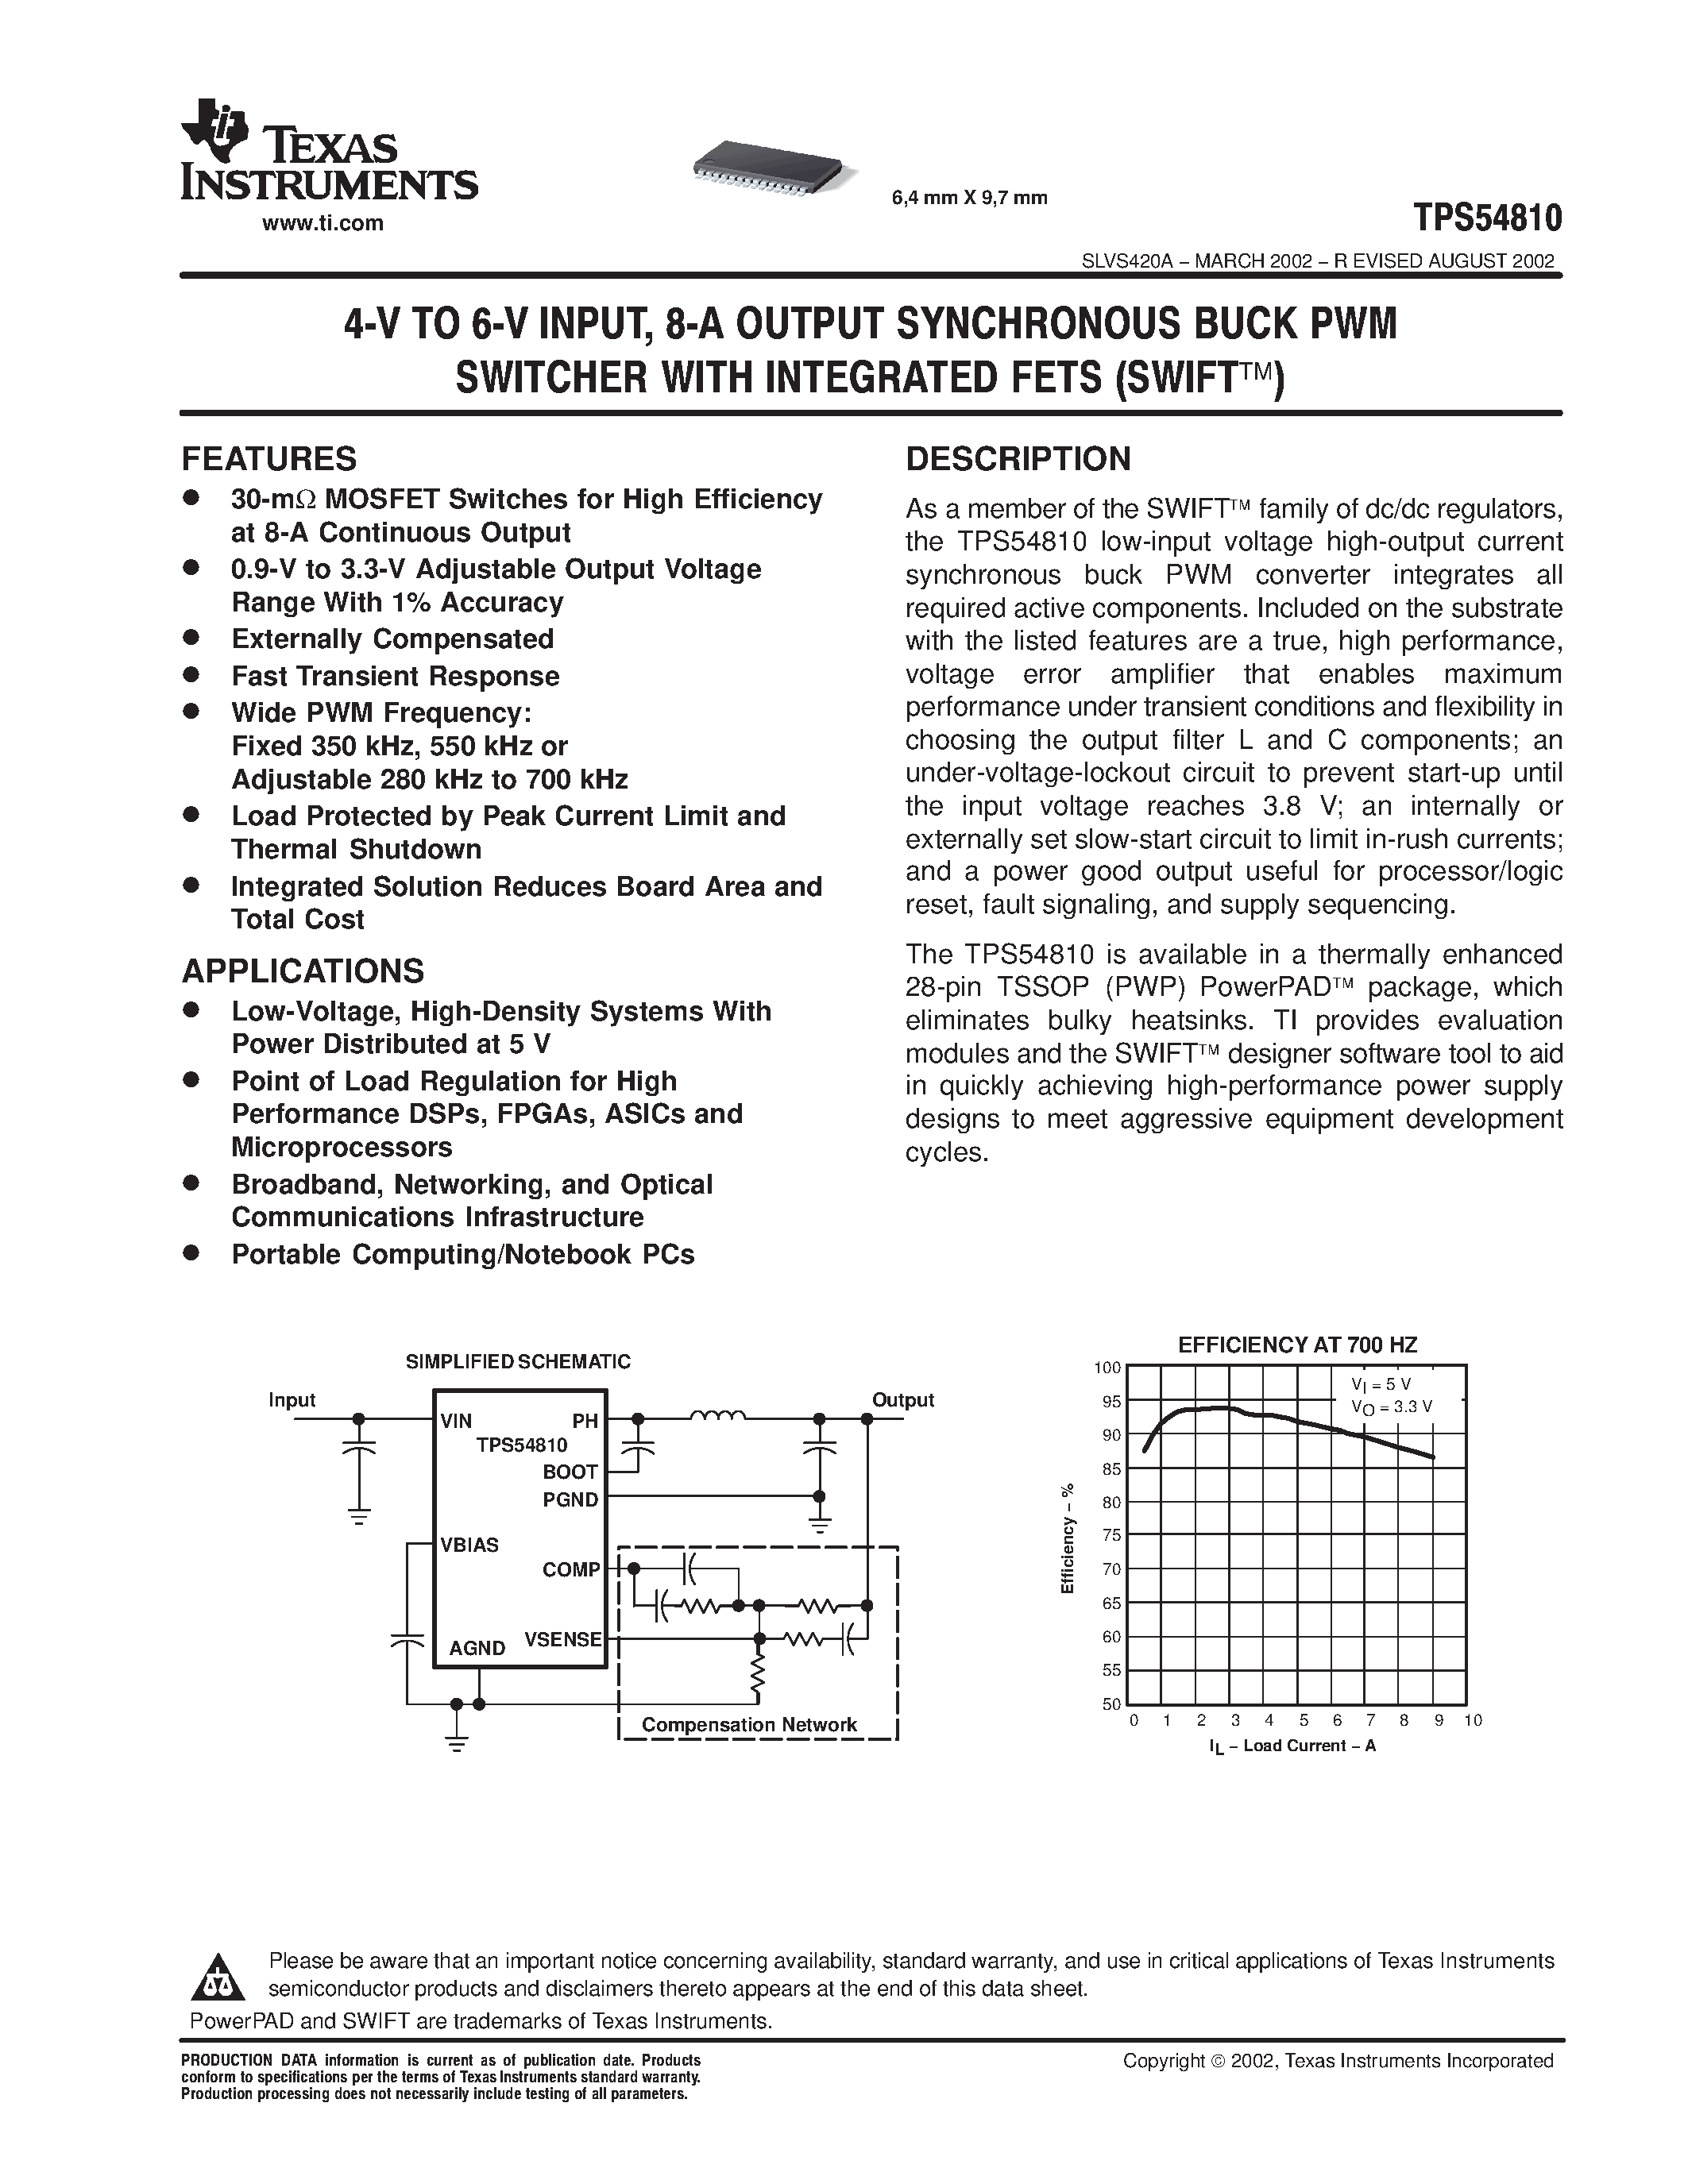 Datasheet TPS54910 - 3-V TO 4-V INPUT/ 9-A OUTPUT SYNCHRONOUS BUCK PWM SWITCHER WITH INTEGRATED FETs (SWIFT) page 1